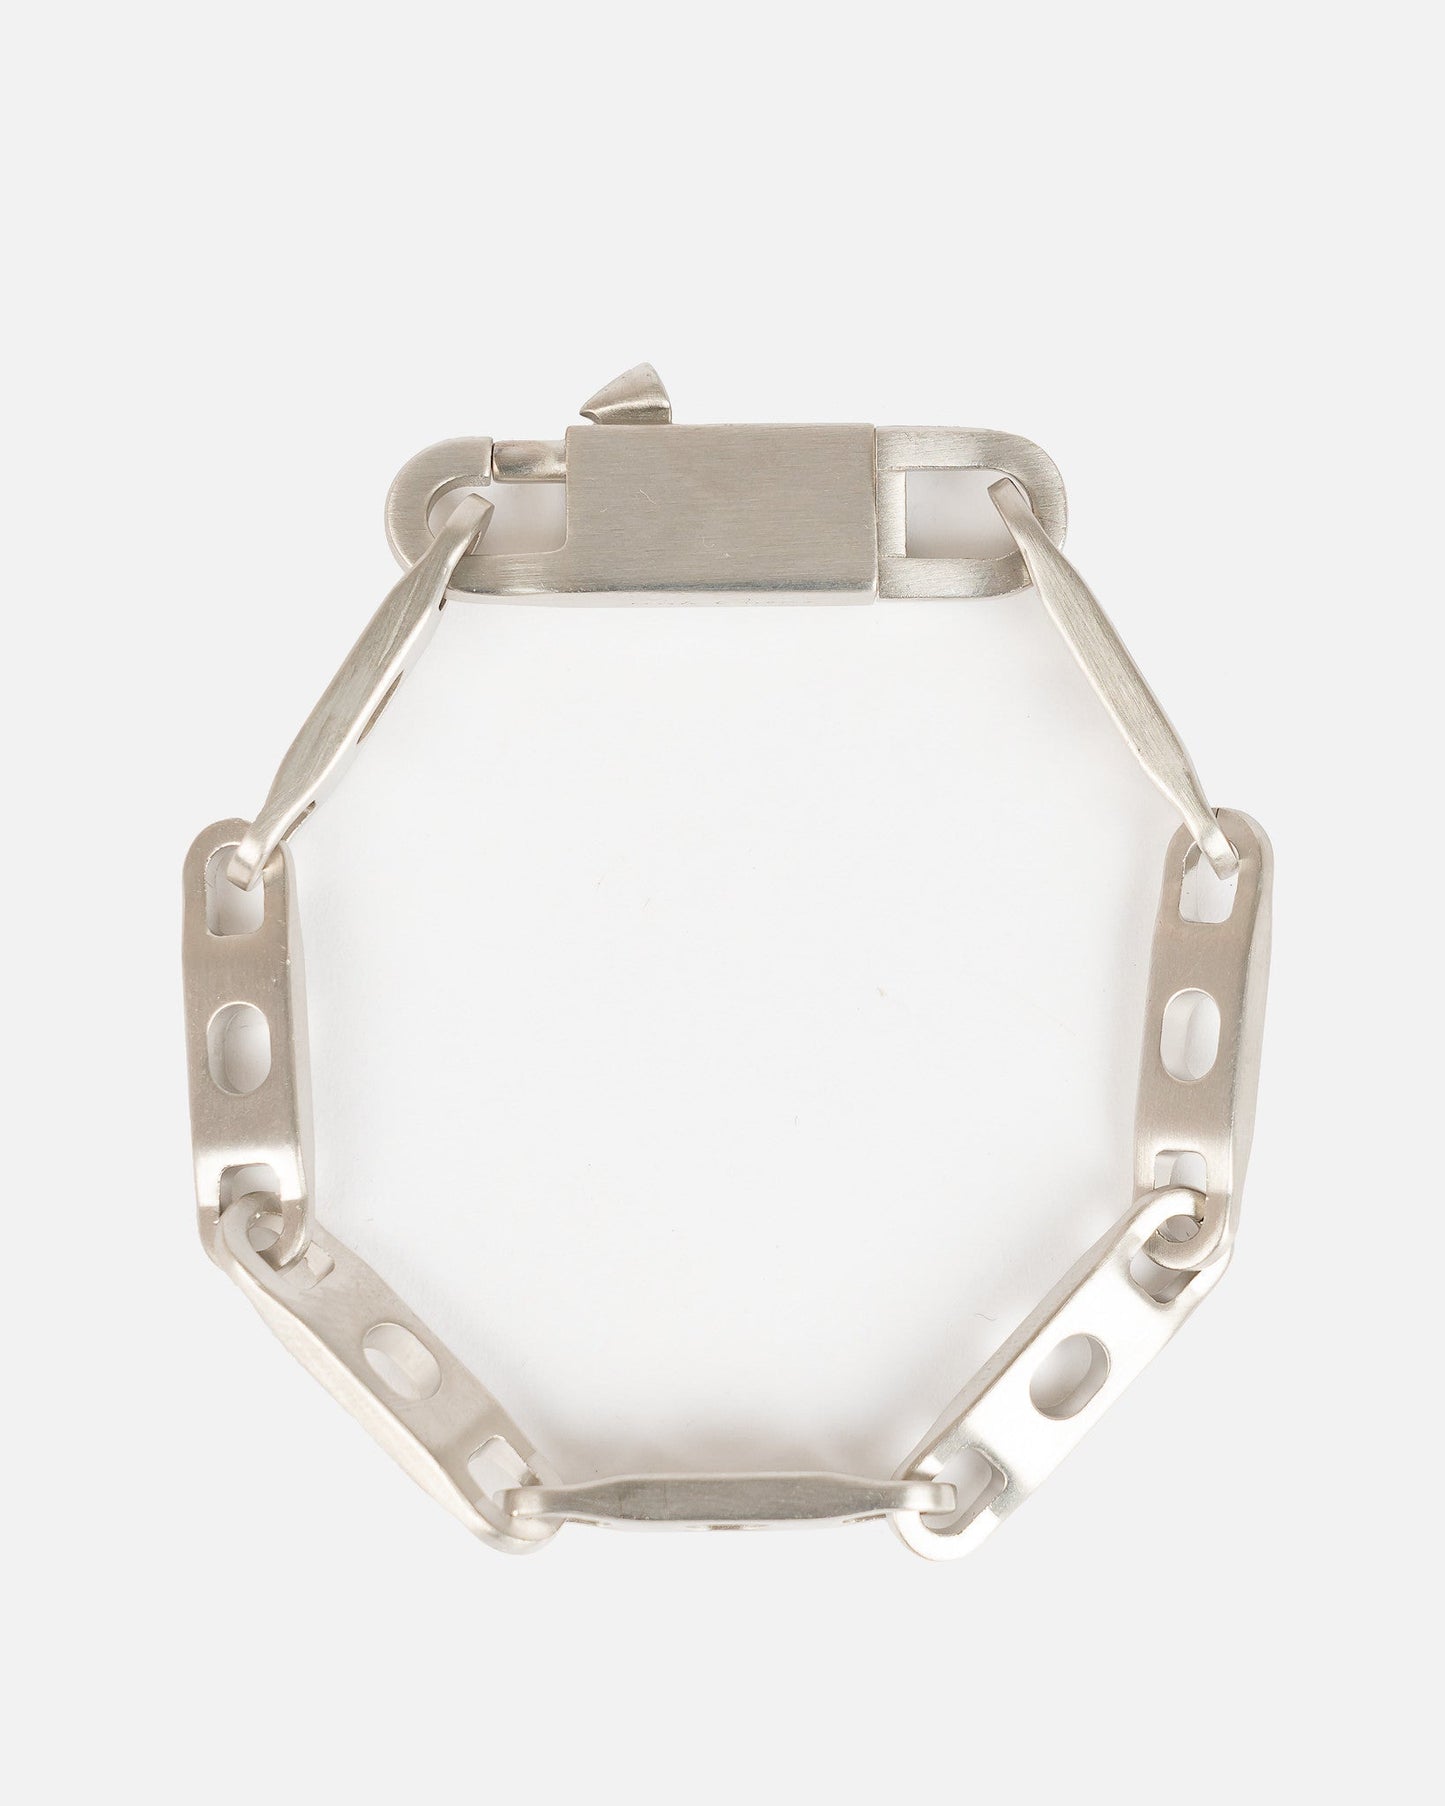 Rick Owens Jewelry Signature Chain Bracelet in Silver